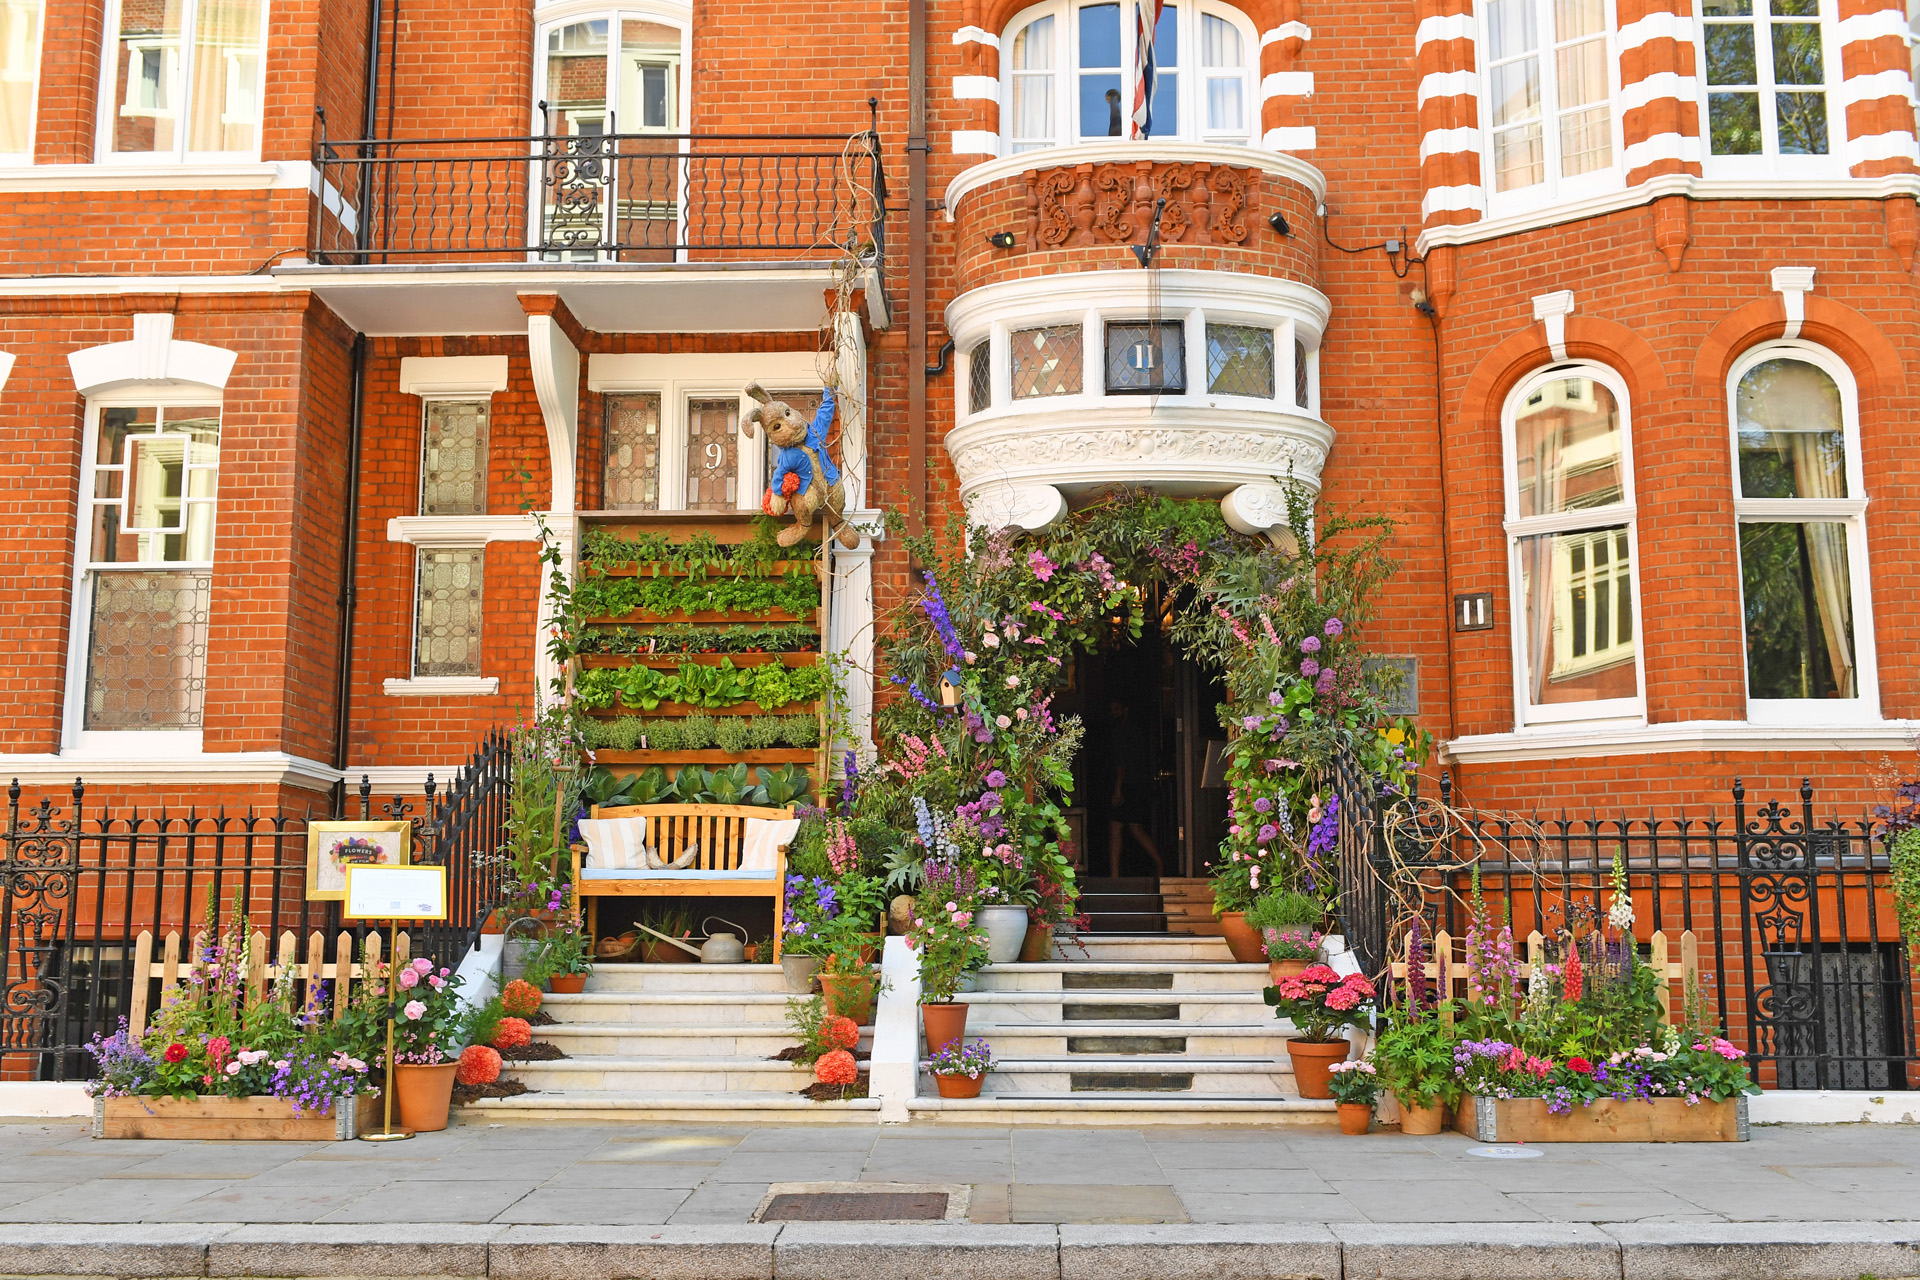 Full Grown with Louis Vuitton for Chelsea in Bloom! - Full GrownFull Grown